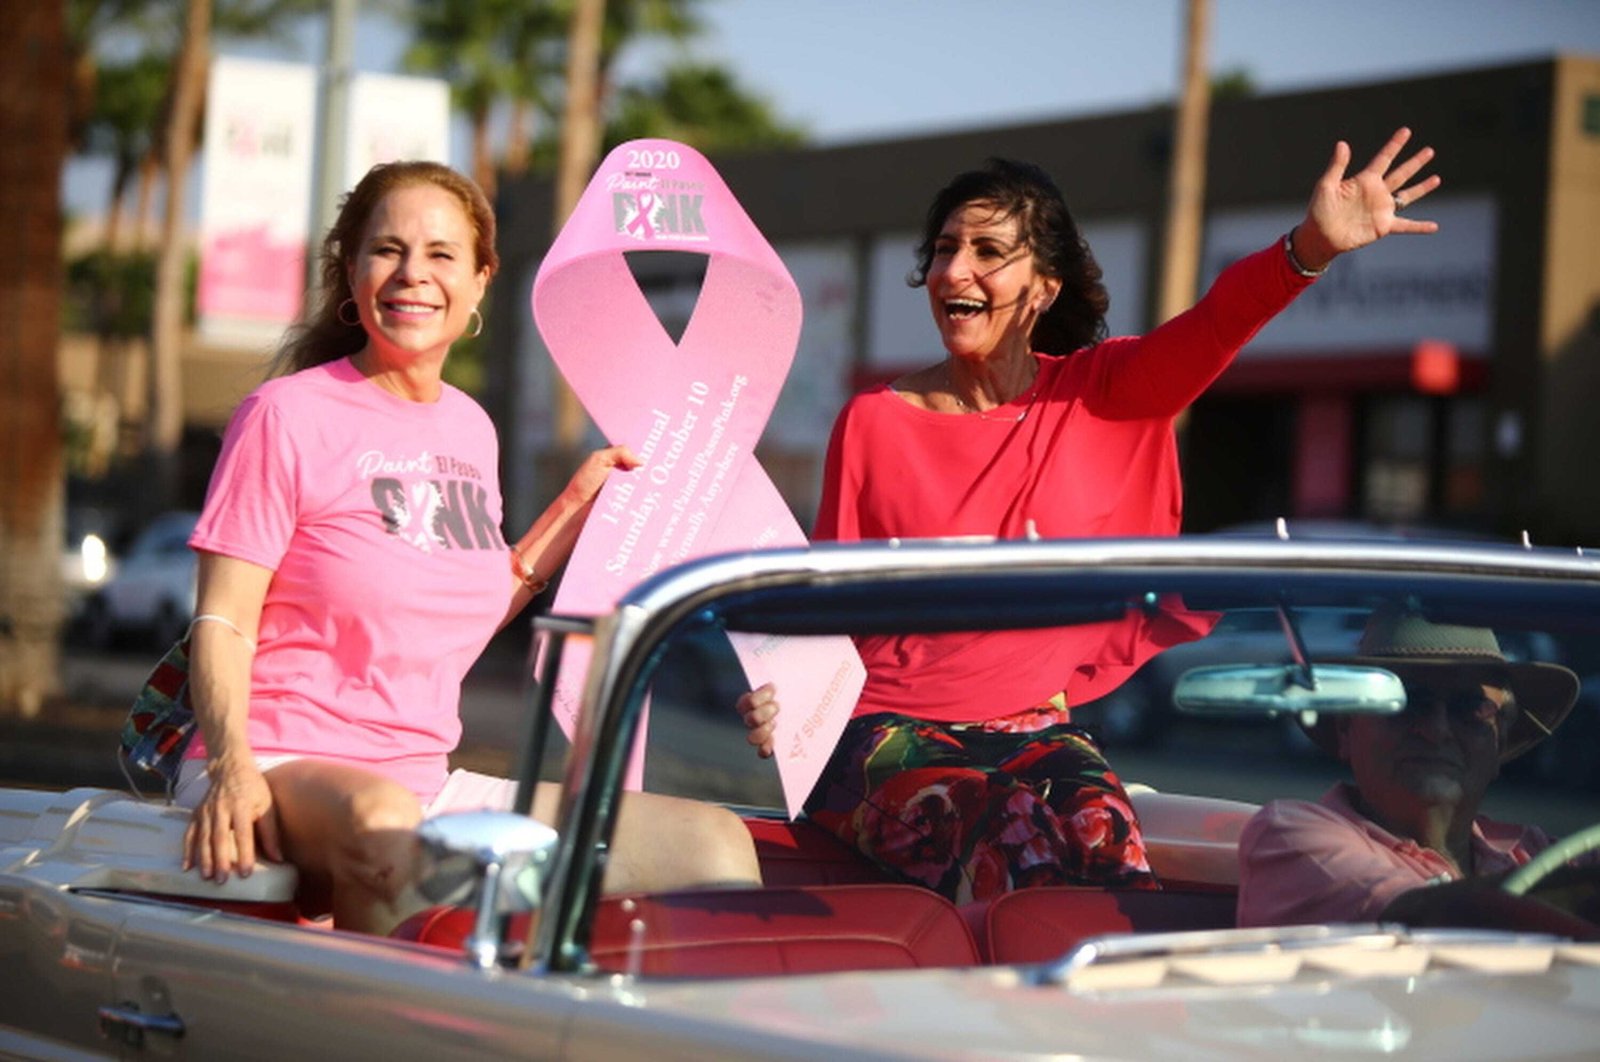 Palm Desert Council members participate in Friday Cruise Night for breast cancer awareness on El Paseo in Palm Desert, Calif., on October 9, 2020. (REUTERS Photo)